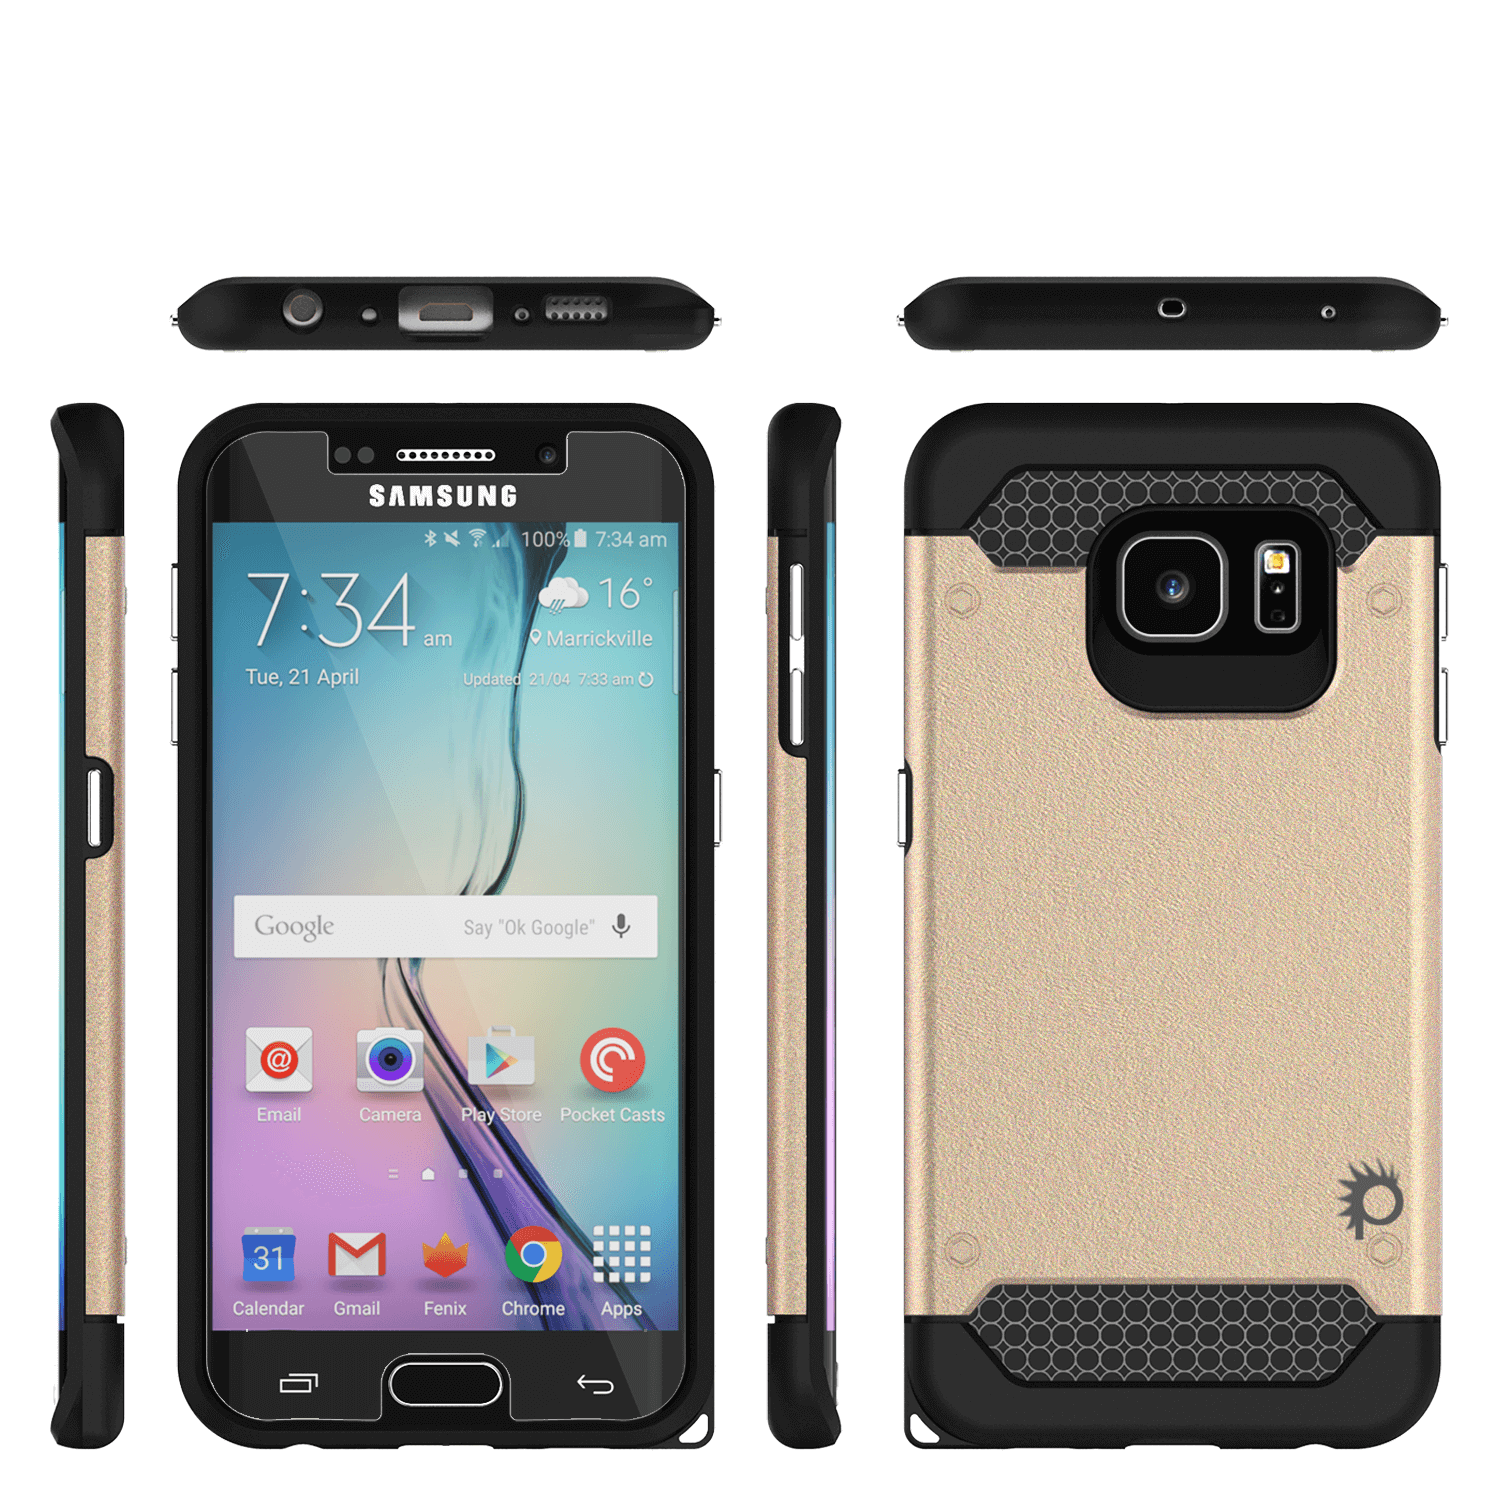 Galaxy s6 EDGE Case PunkCase Galactic Gold Series Slim Armor Soft Cover w/ Screen Protector